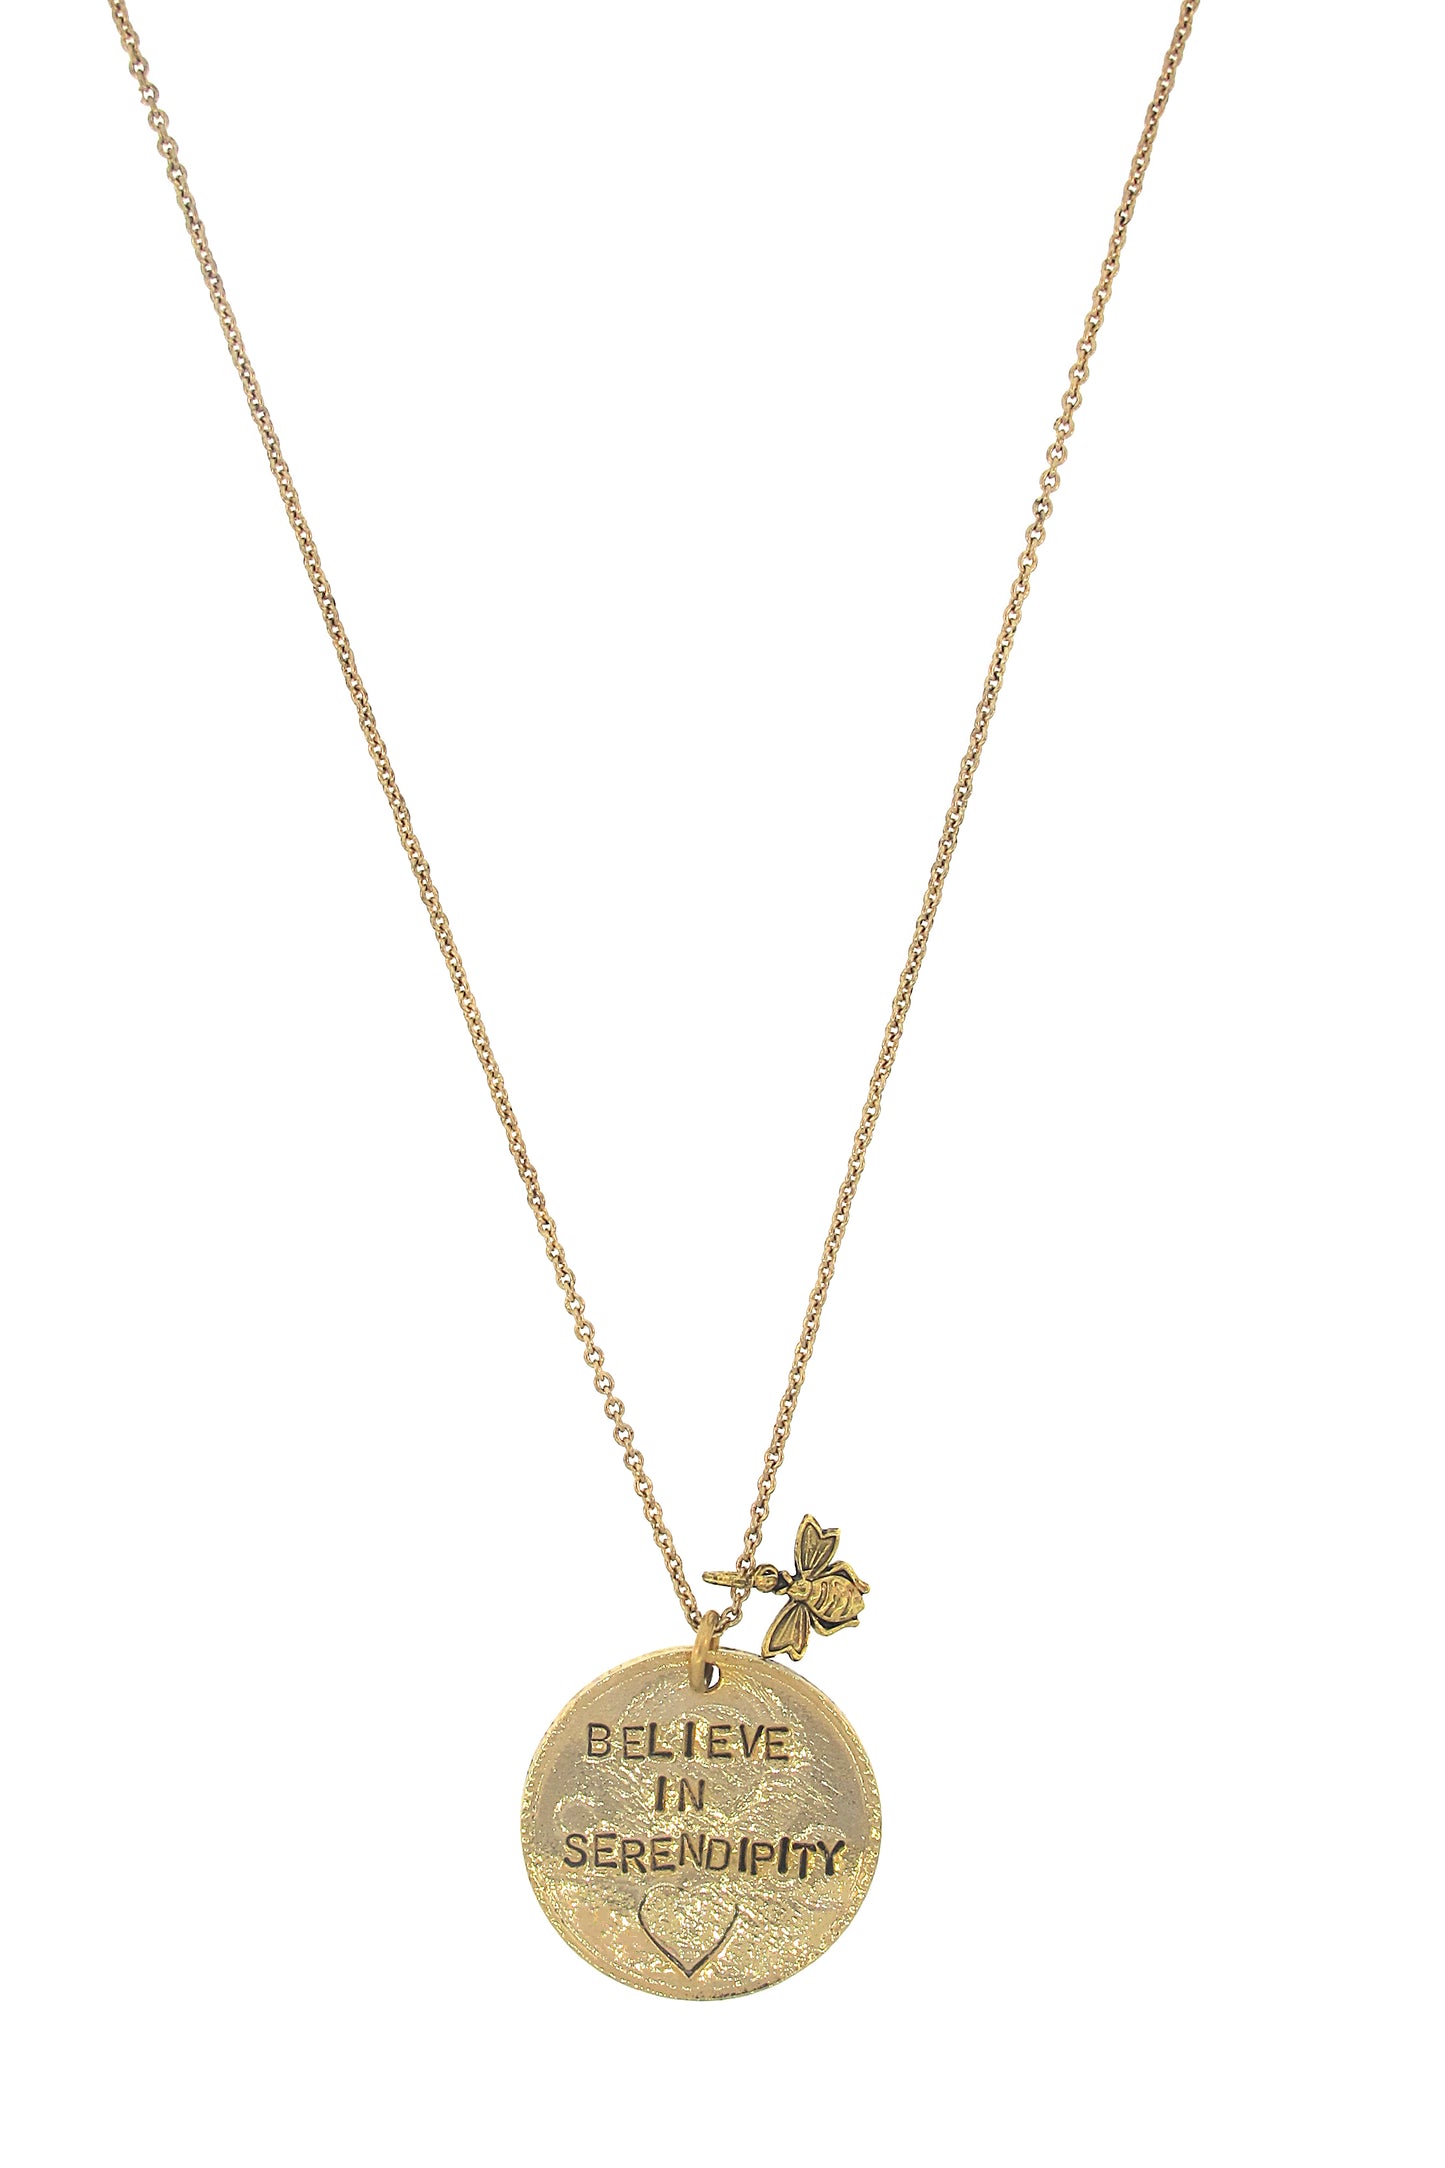 Believe In Serendipity Hand Stamped Charm Necklace